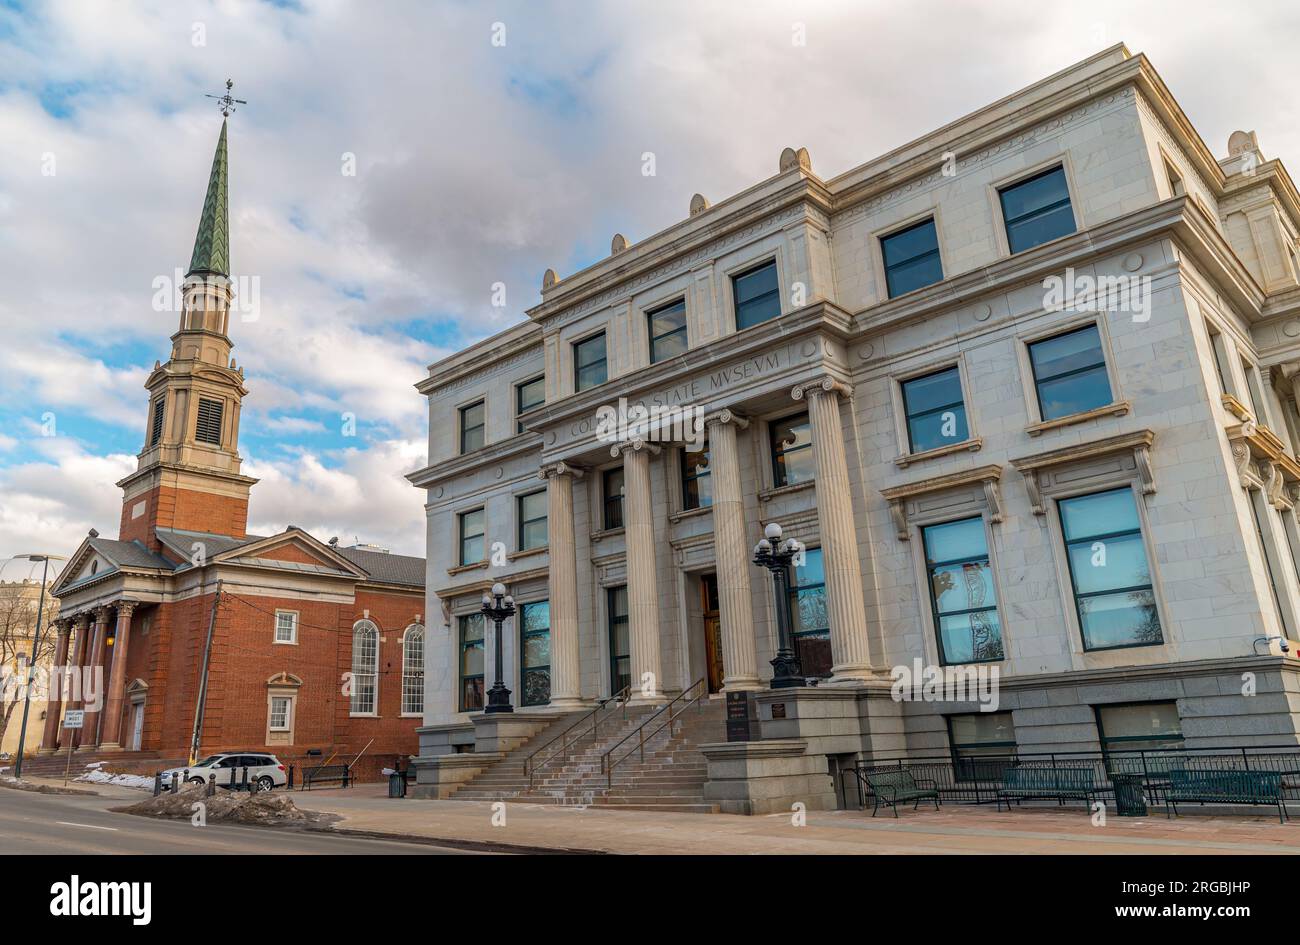 The historic state museum in downtown Denver, Colorado next door to a high reaching old church steeple. Stock Photo